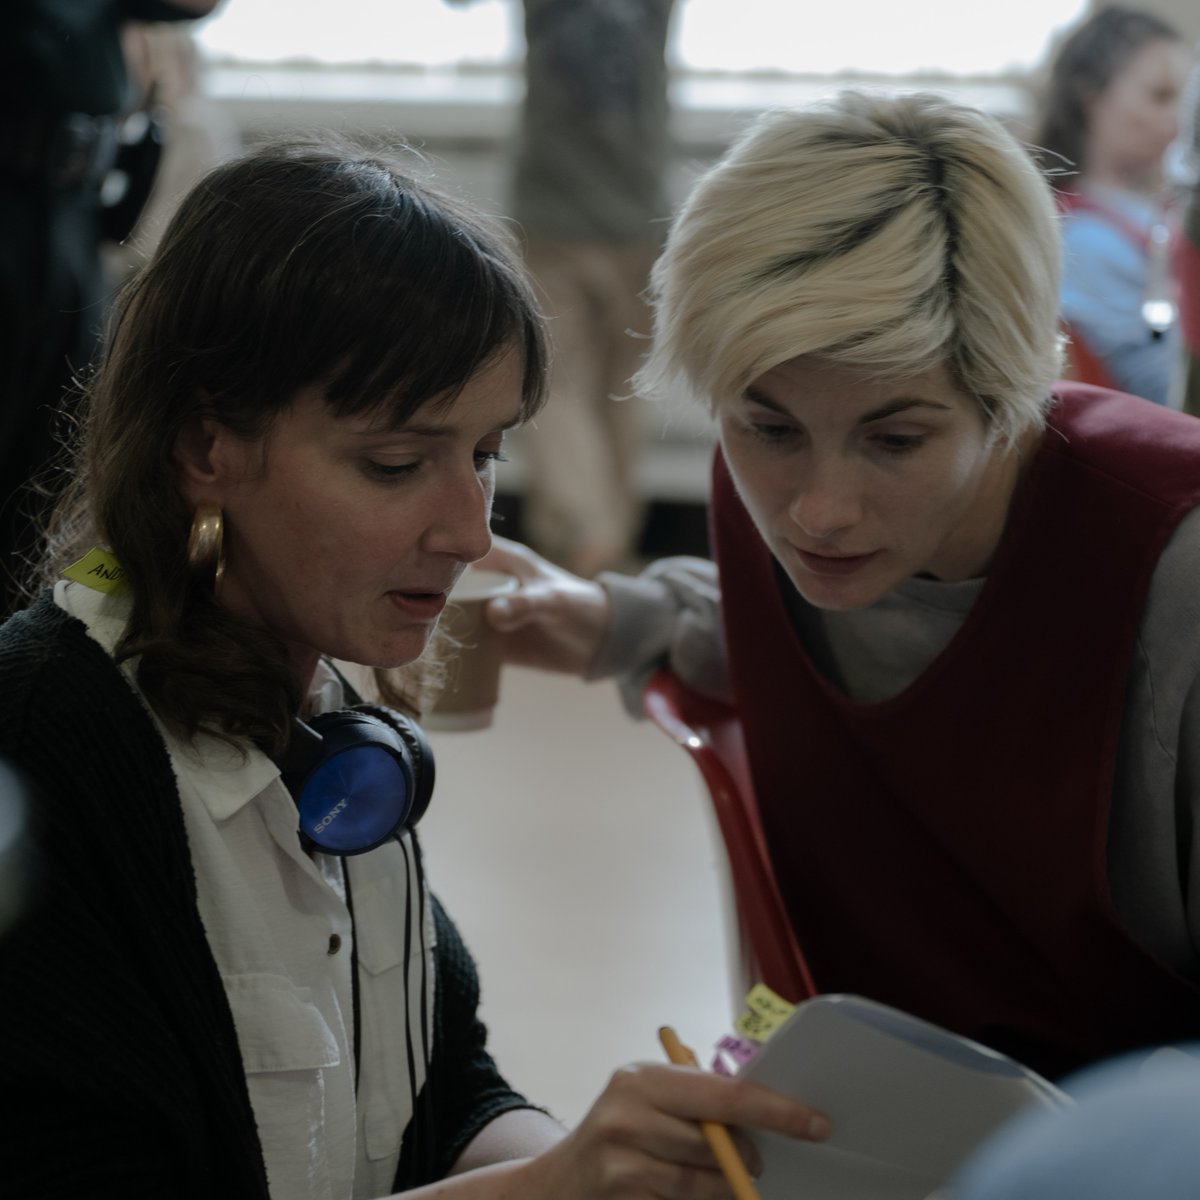 Now that the finale is out, take a look at some behind-the-scenes images from #Time's compelling second season. #BritBox. #jodiewhittaker #tamaralawrance #bellaramsey